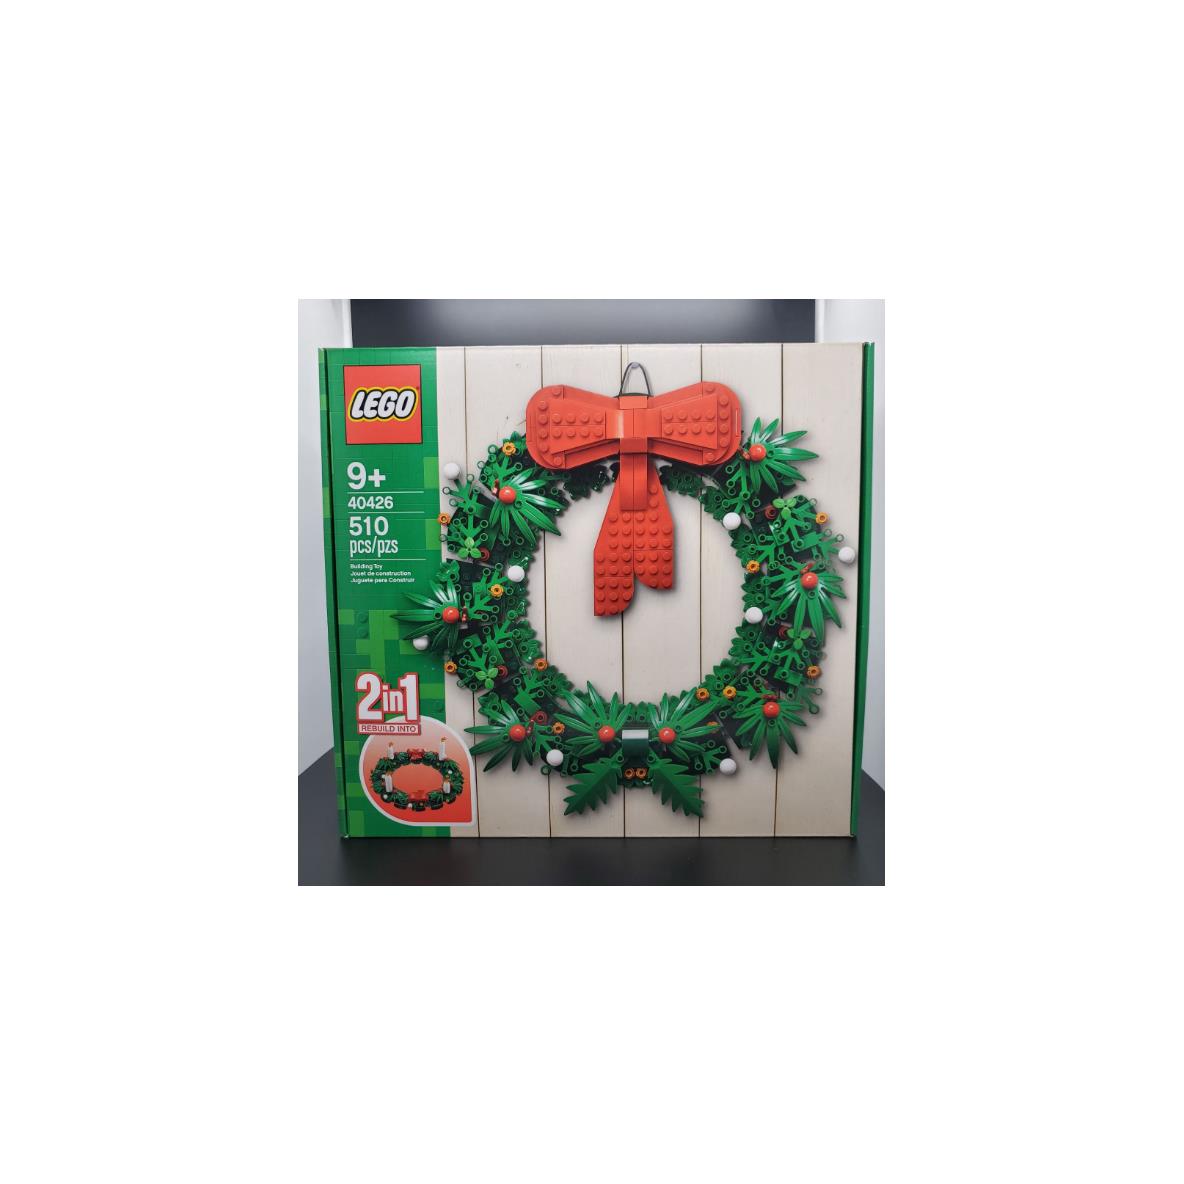 Lego Christmas Wreath 2-in-1 510 Pieces Set 40426 Building Kit Holiday Gift